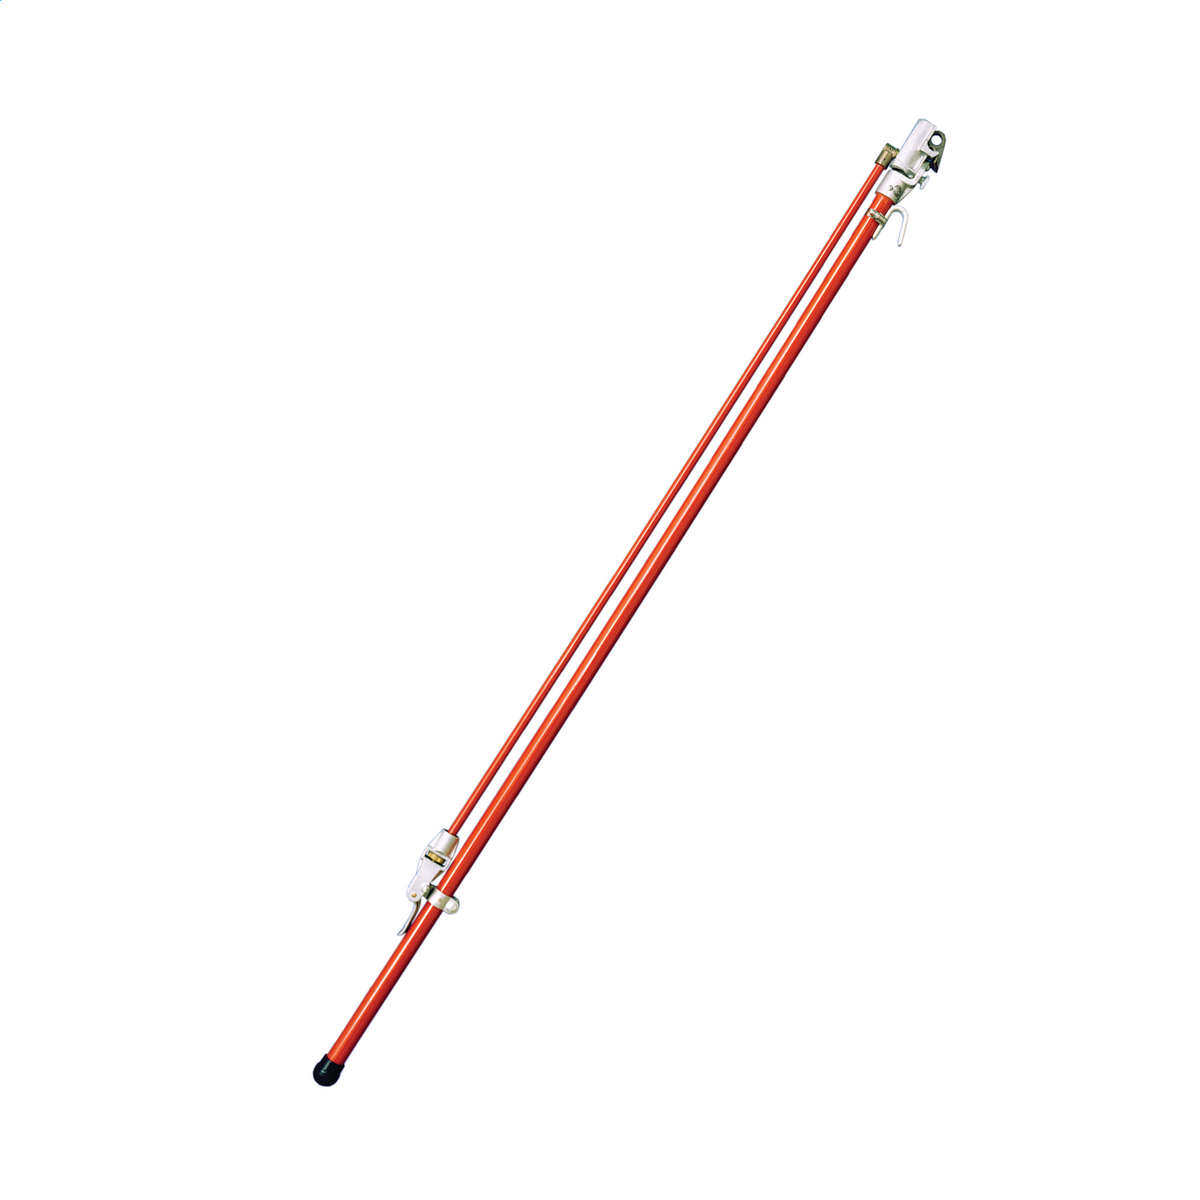 Wire Holding Stick, 1-1/4 in X 8 ft5 in, C4033069